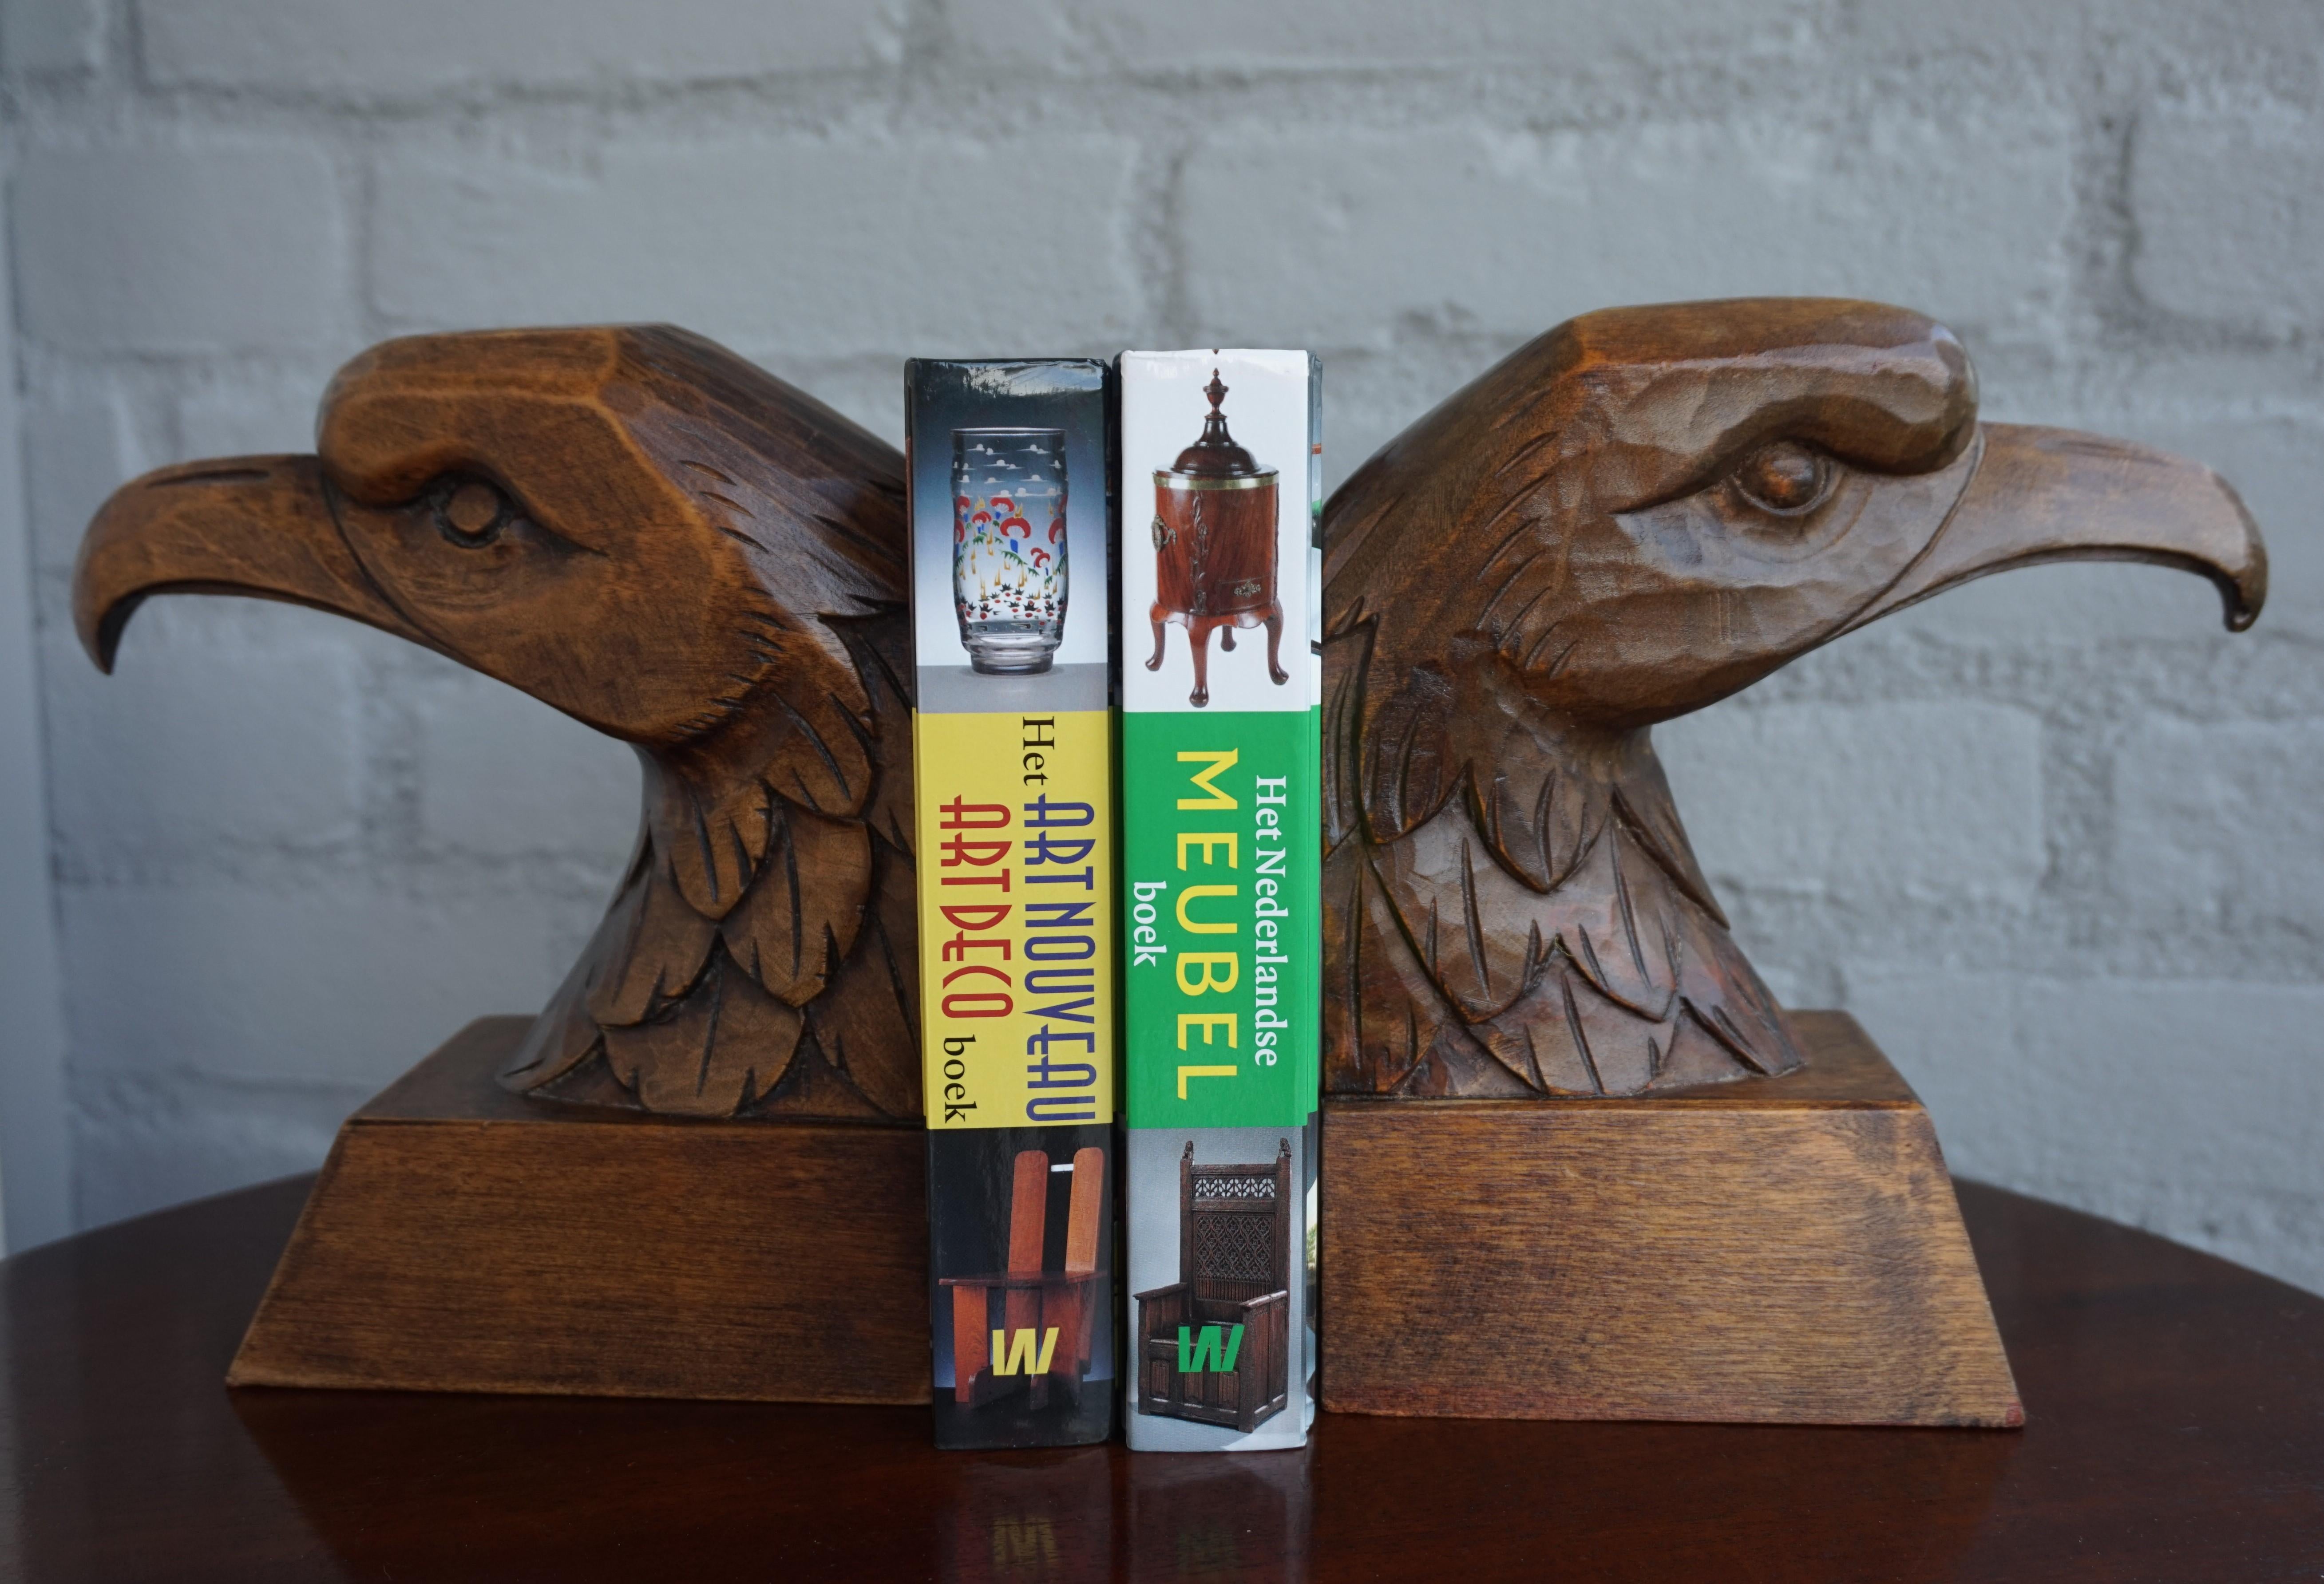 All handcrafted solid wooden eagle bust bookends.

If eagles have a special meaning to you or to one of your loved ones then this unique pair could be the perfect gift. These hand carved American or bald eagles are great decoration for a desk or a